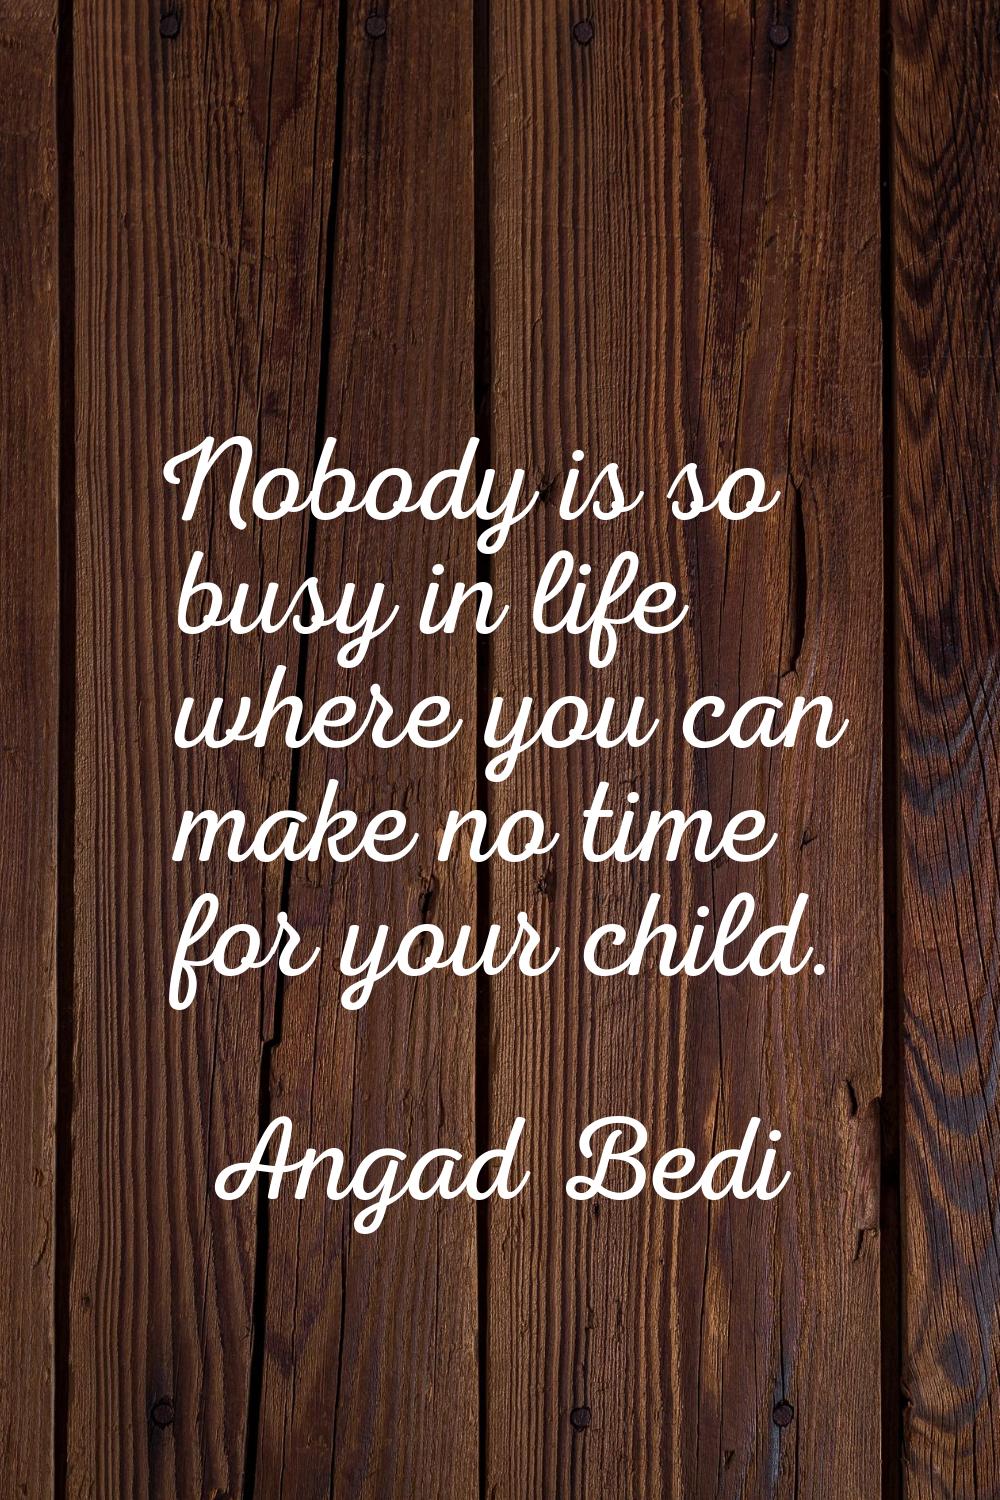 Nobody is so busy in life where you can make no time for your child.